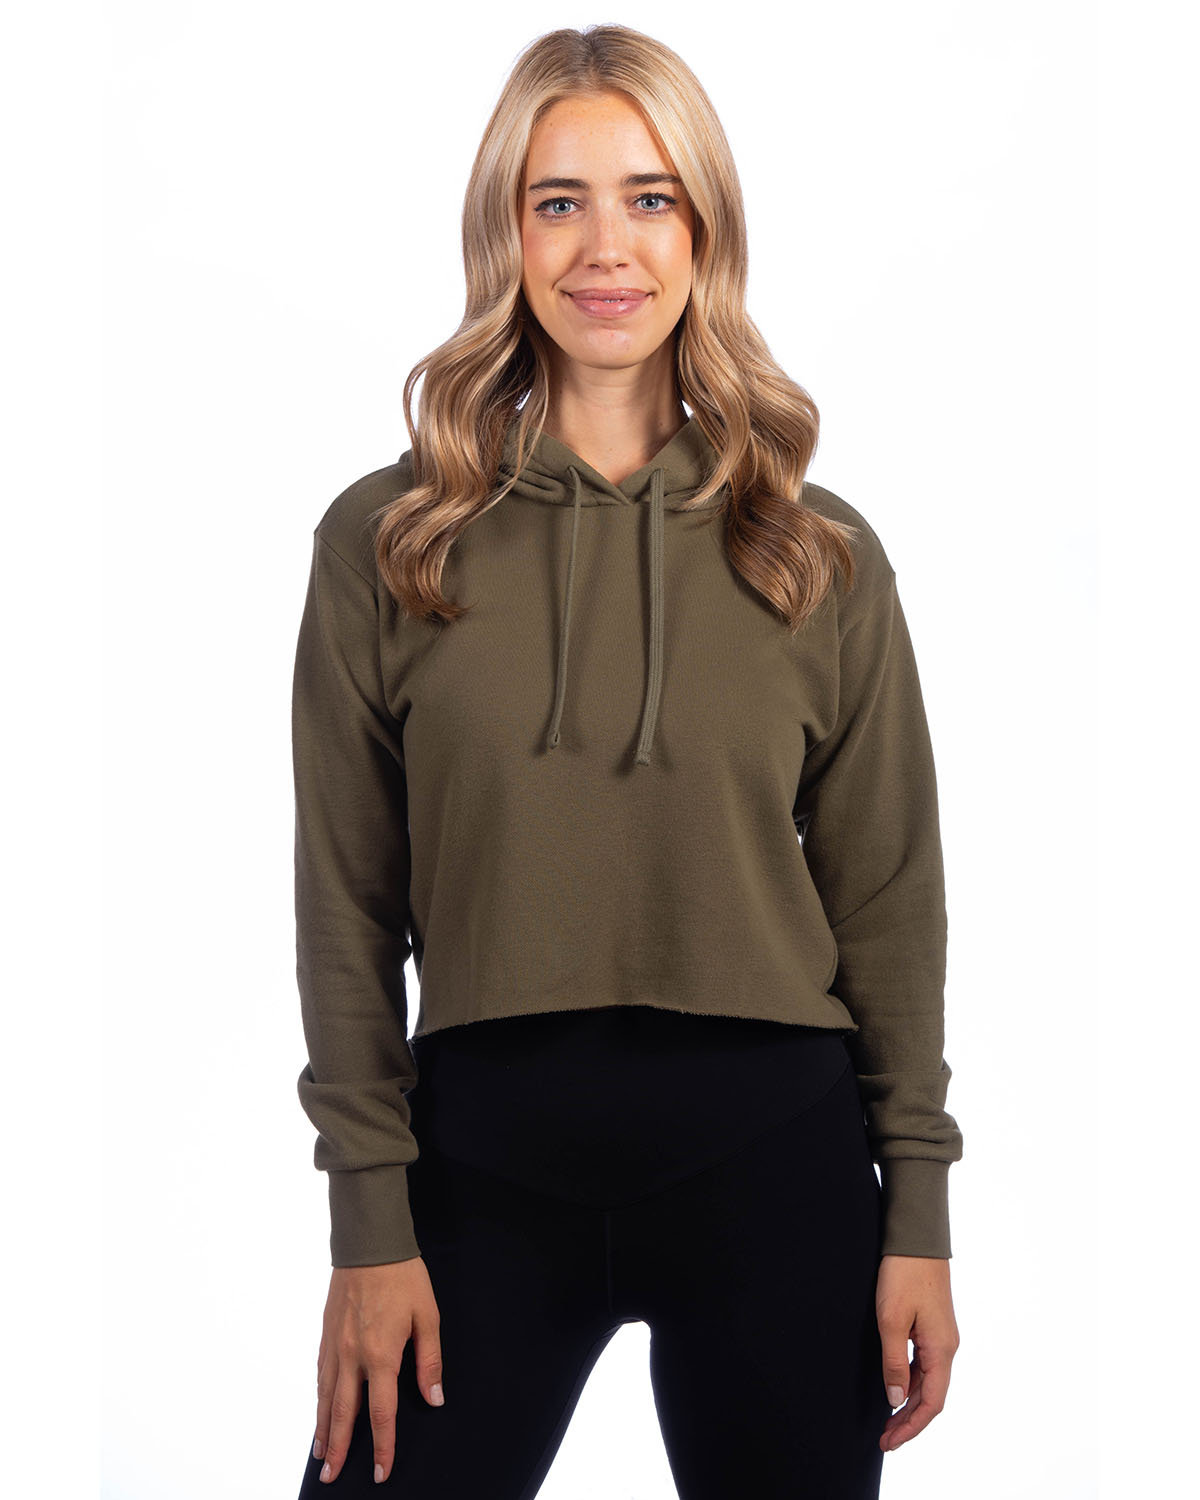 Next Level Ladies' Cropped Pullover Hooded Sweatshirt MILITARY GREEN 